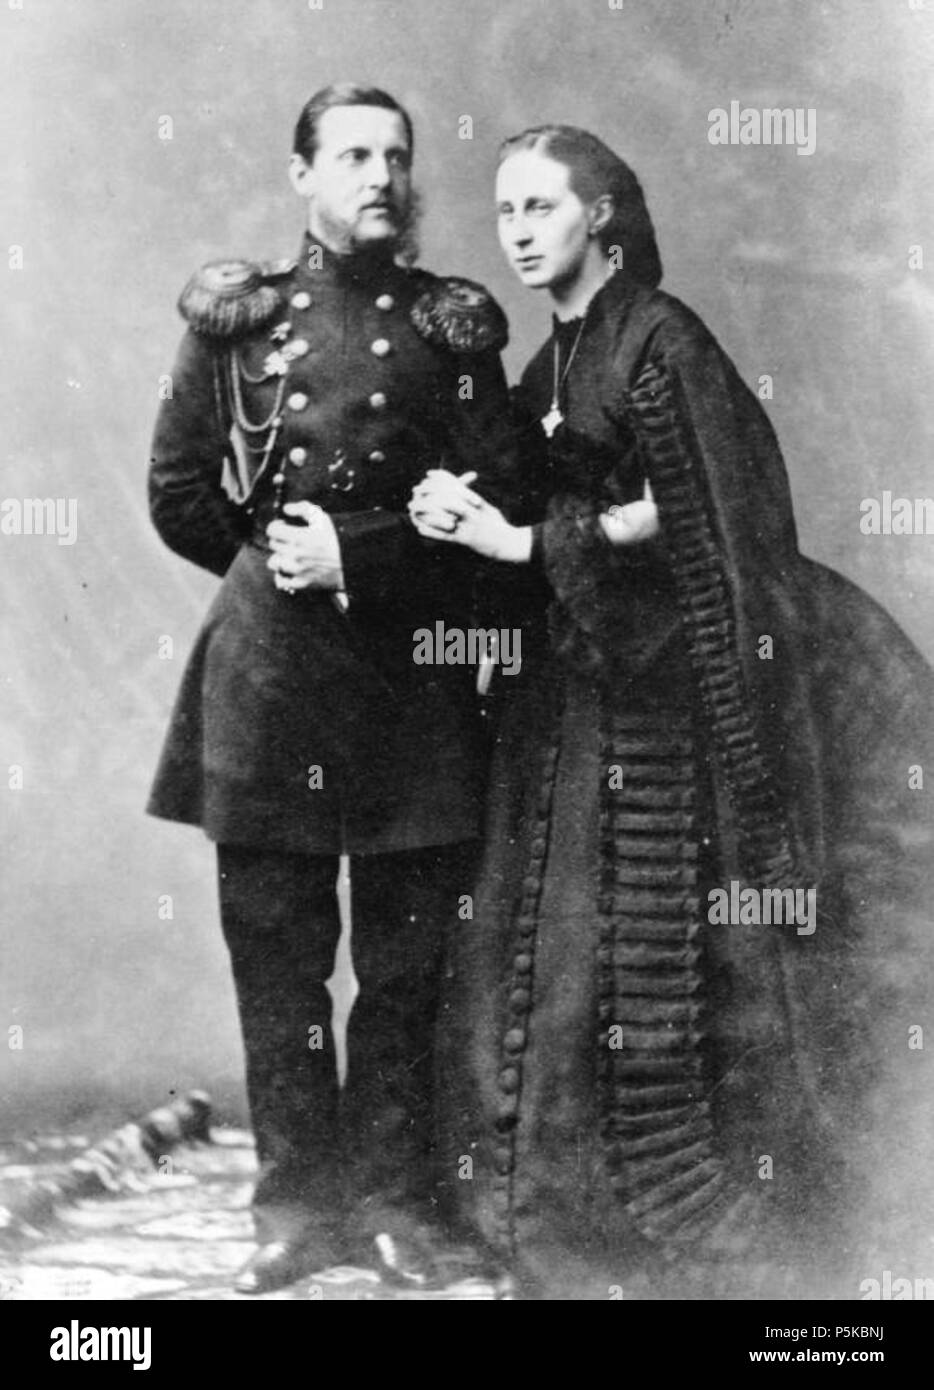 N/A. English: Grand Duchess Alexandra Iosifovna and husband Grand Duke Konstantin Nikolayevich of Russia . Early to mid 1860s. Unknown - photo dates to mid 1860s 82 Alexandra Iosifovna and husband Konstantin Nikolayevich Stock Photo